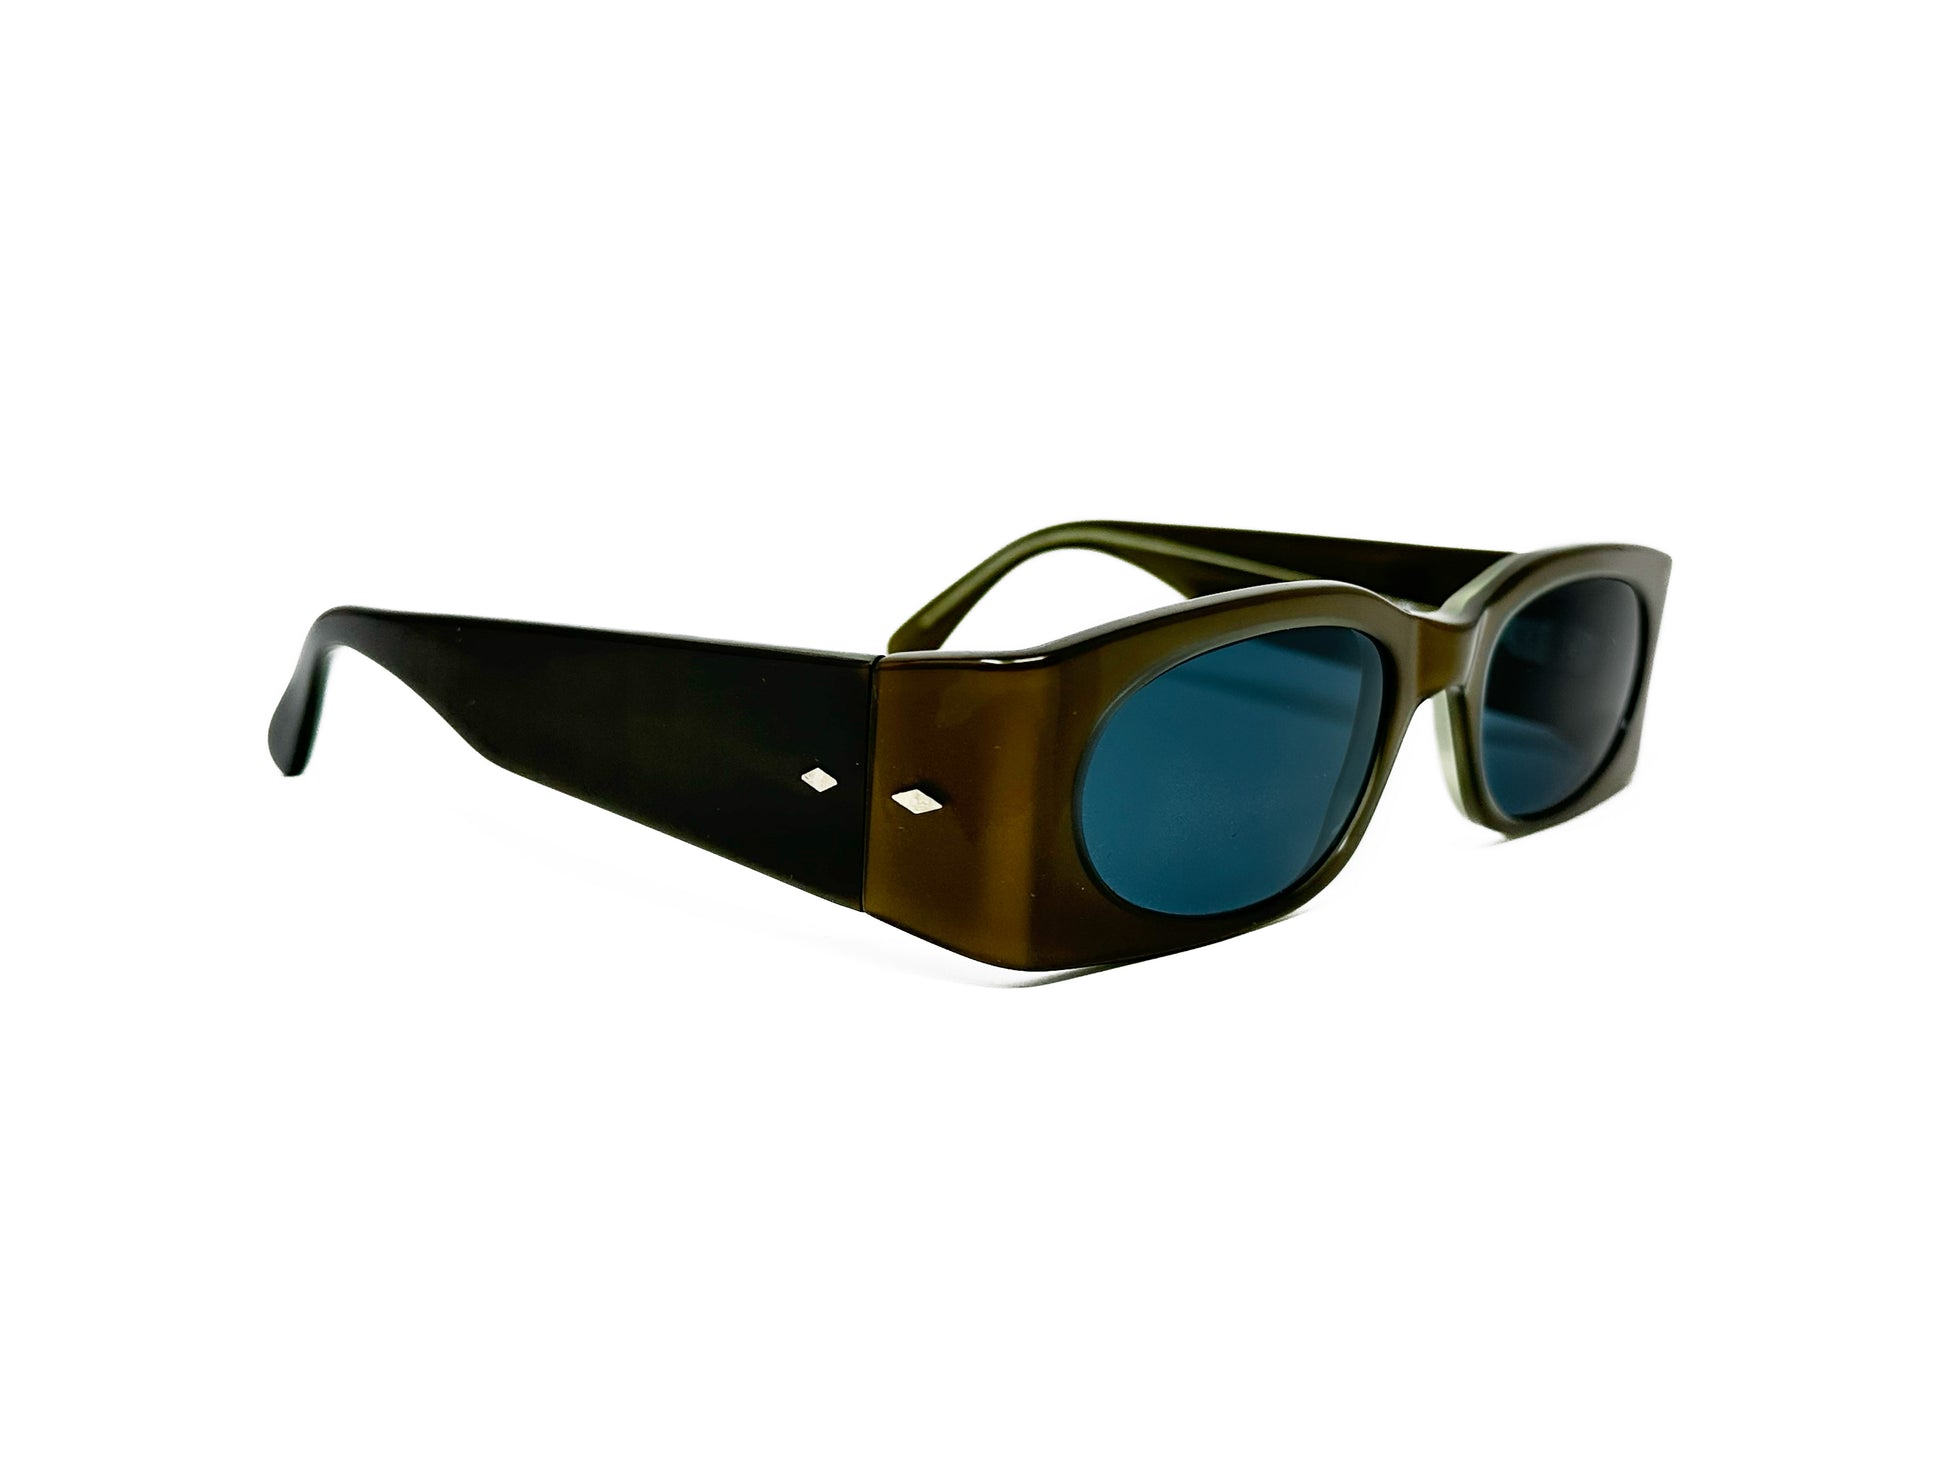 Kador rectangular acetate sunglasses with oval lenses. Model: DF2012. Color: M/1434 - Olive with blue lenses. Side view.